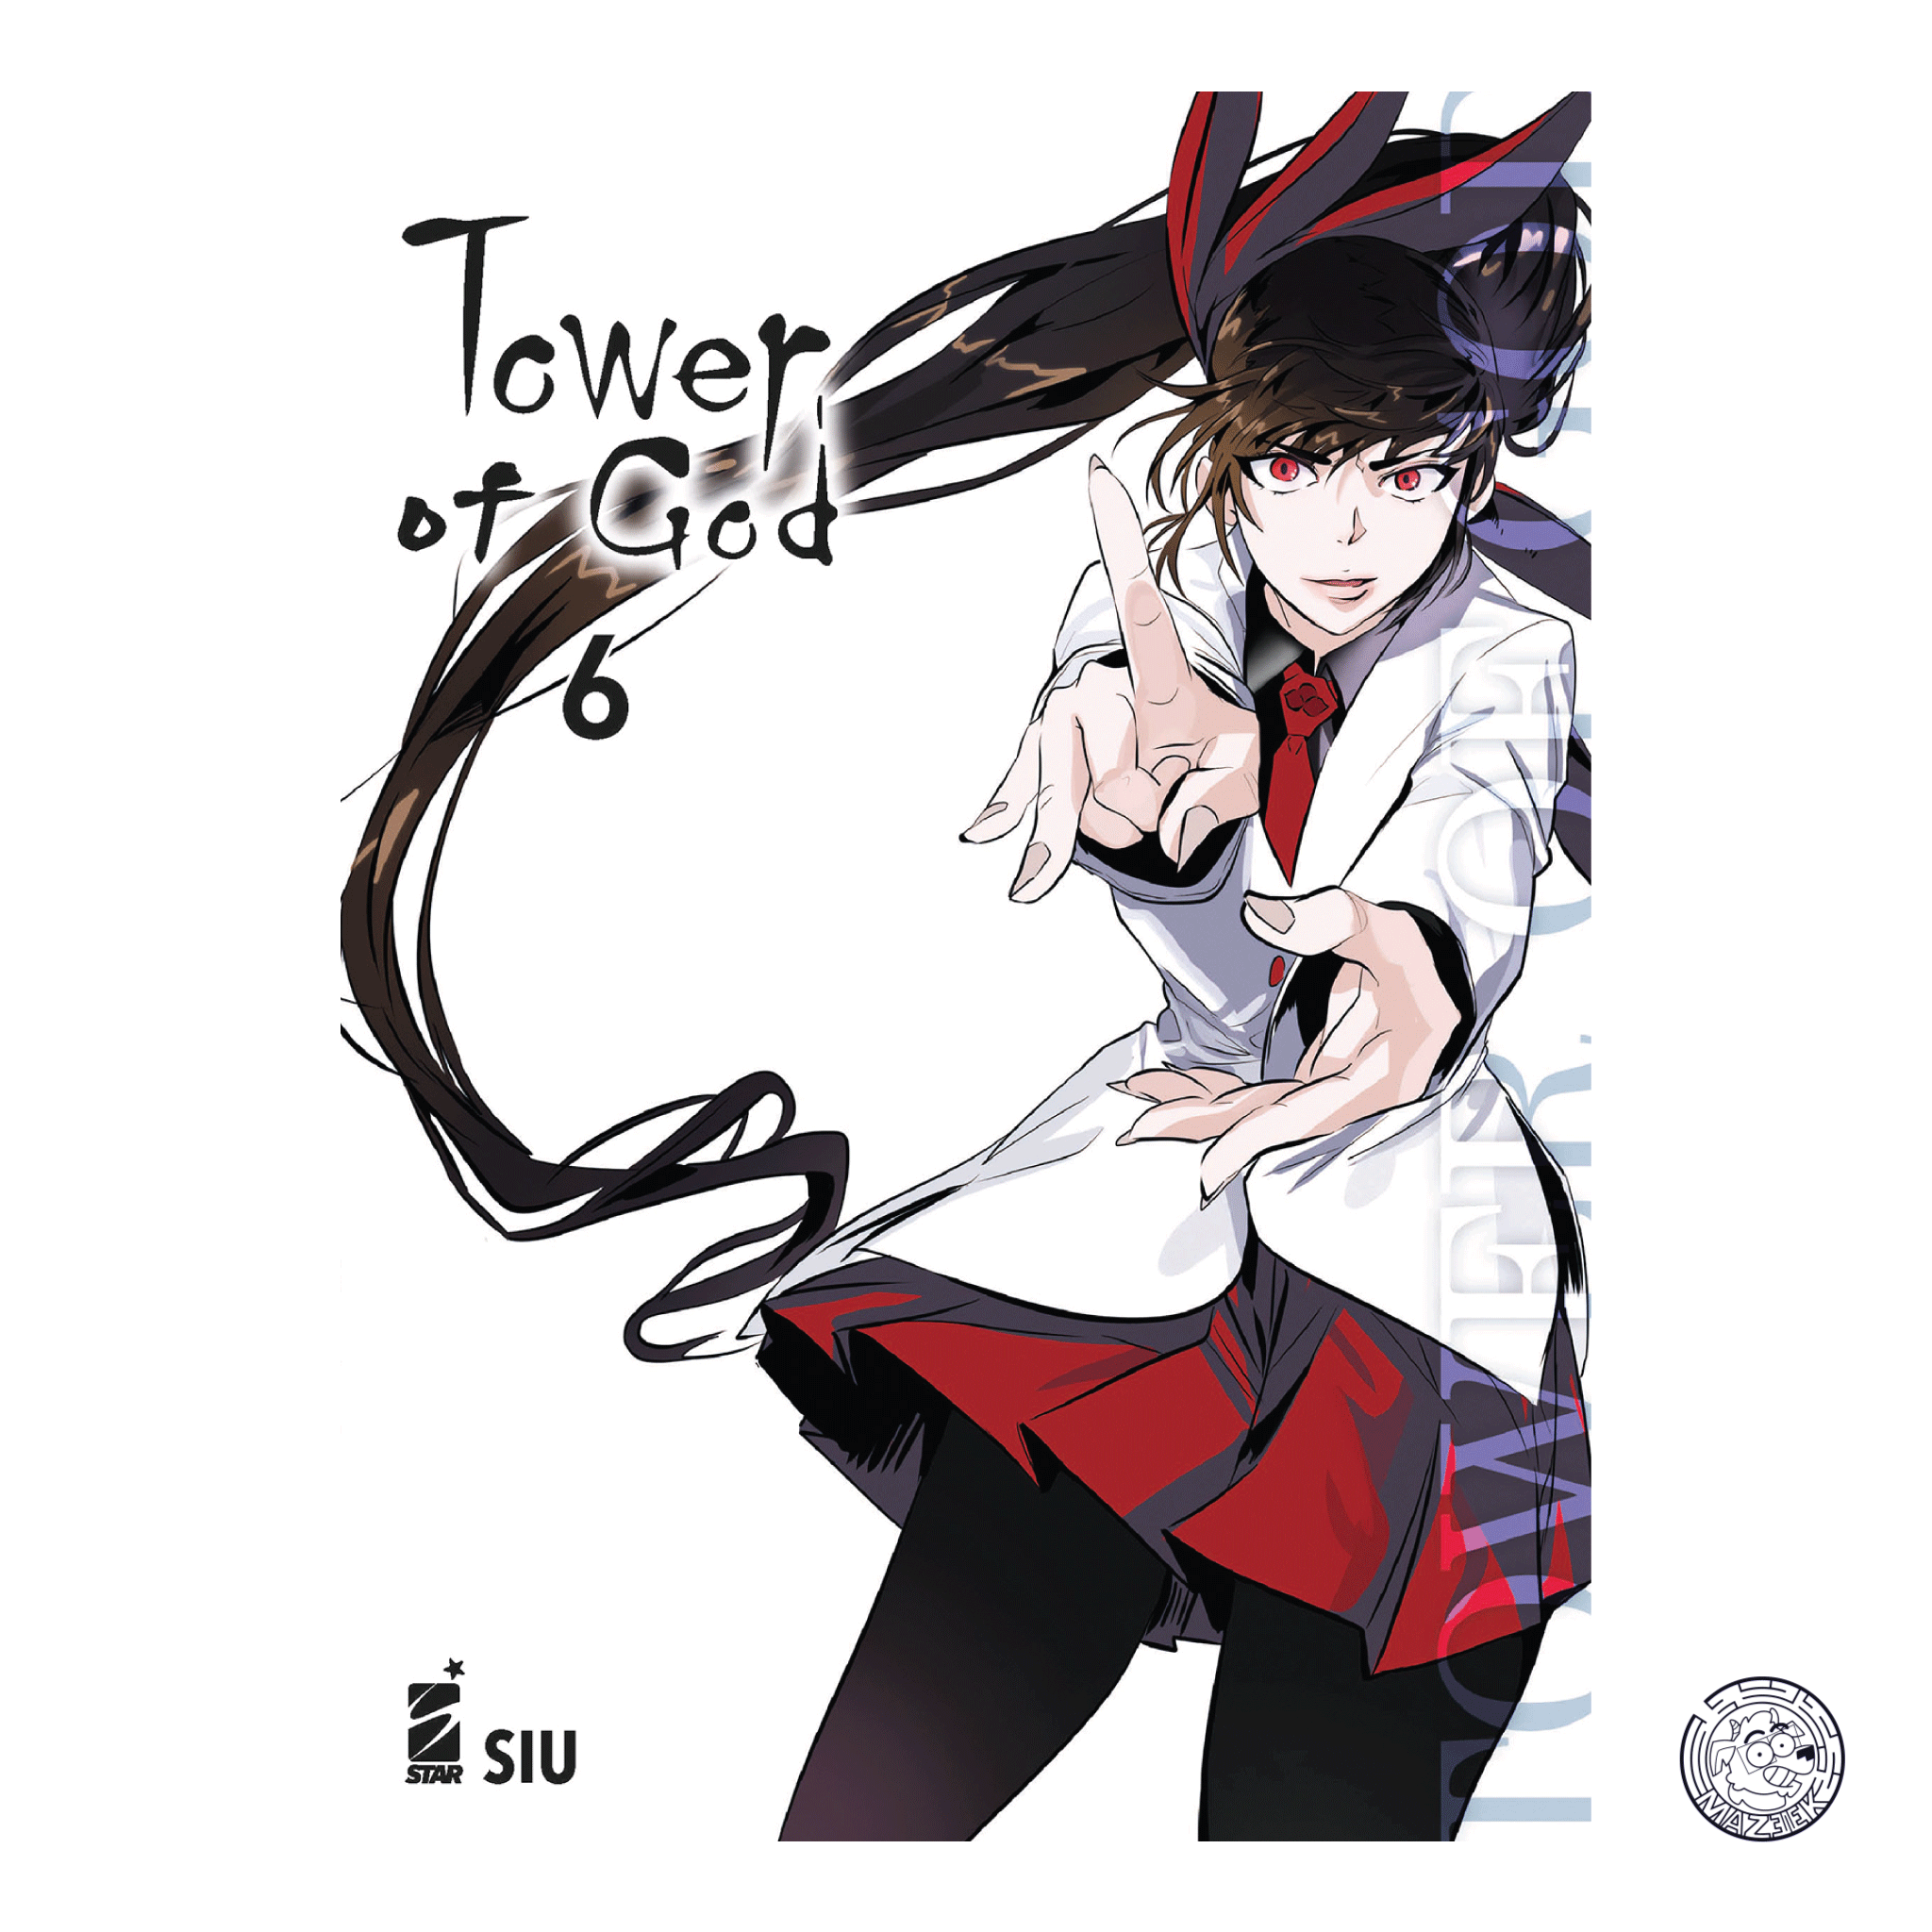 Tower Of God 06